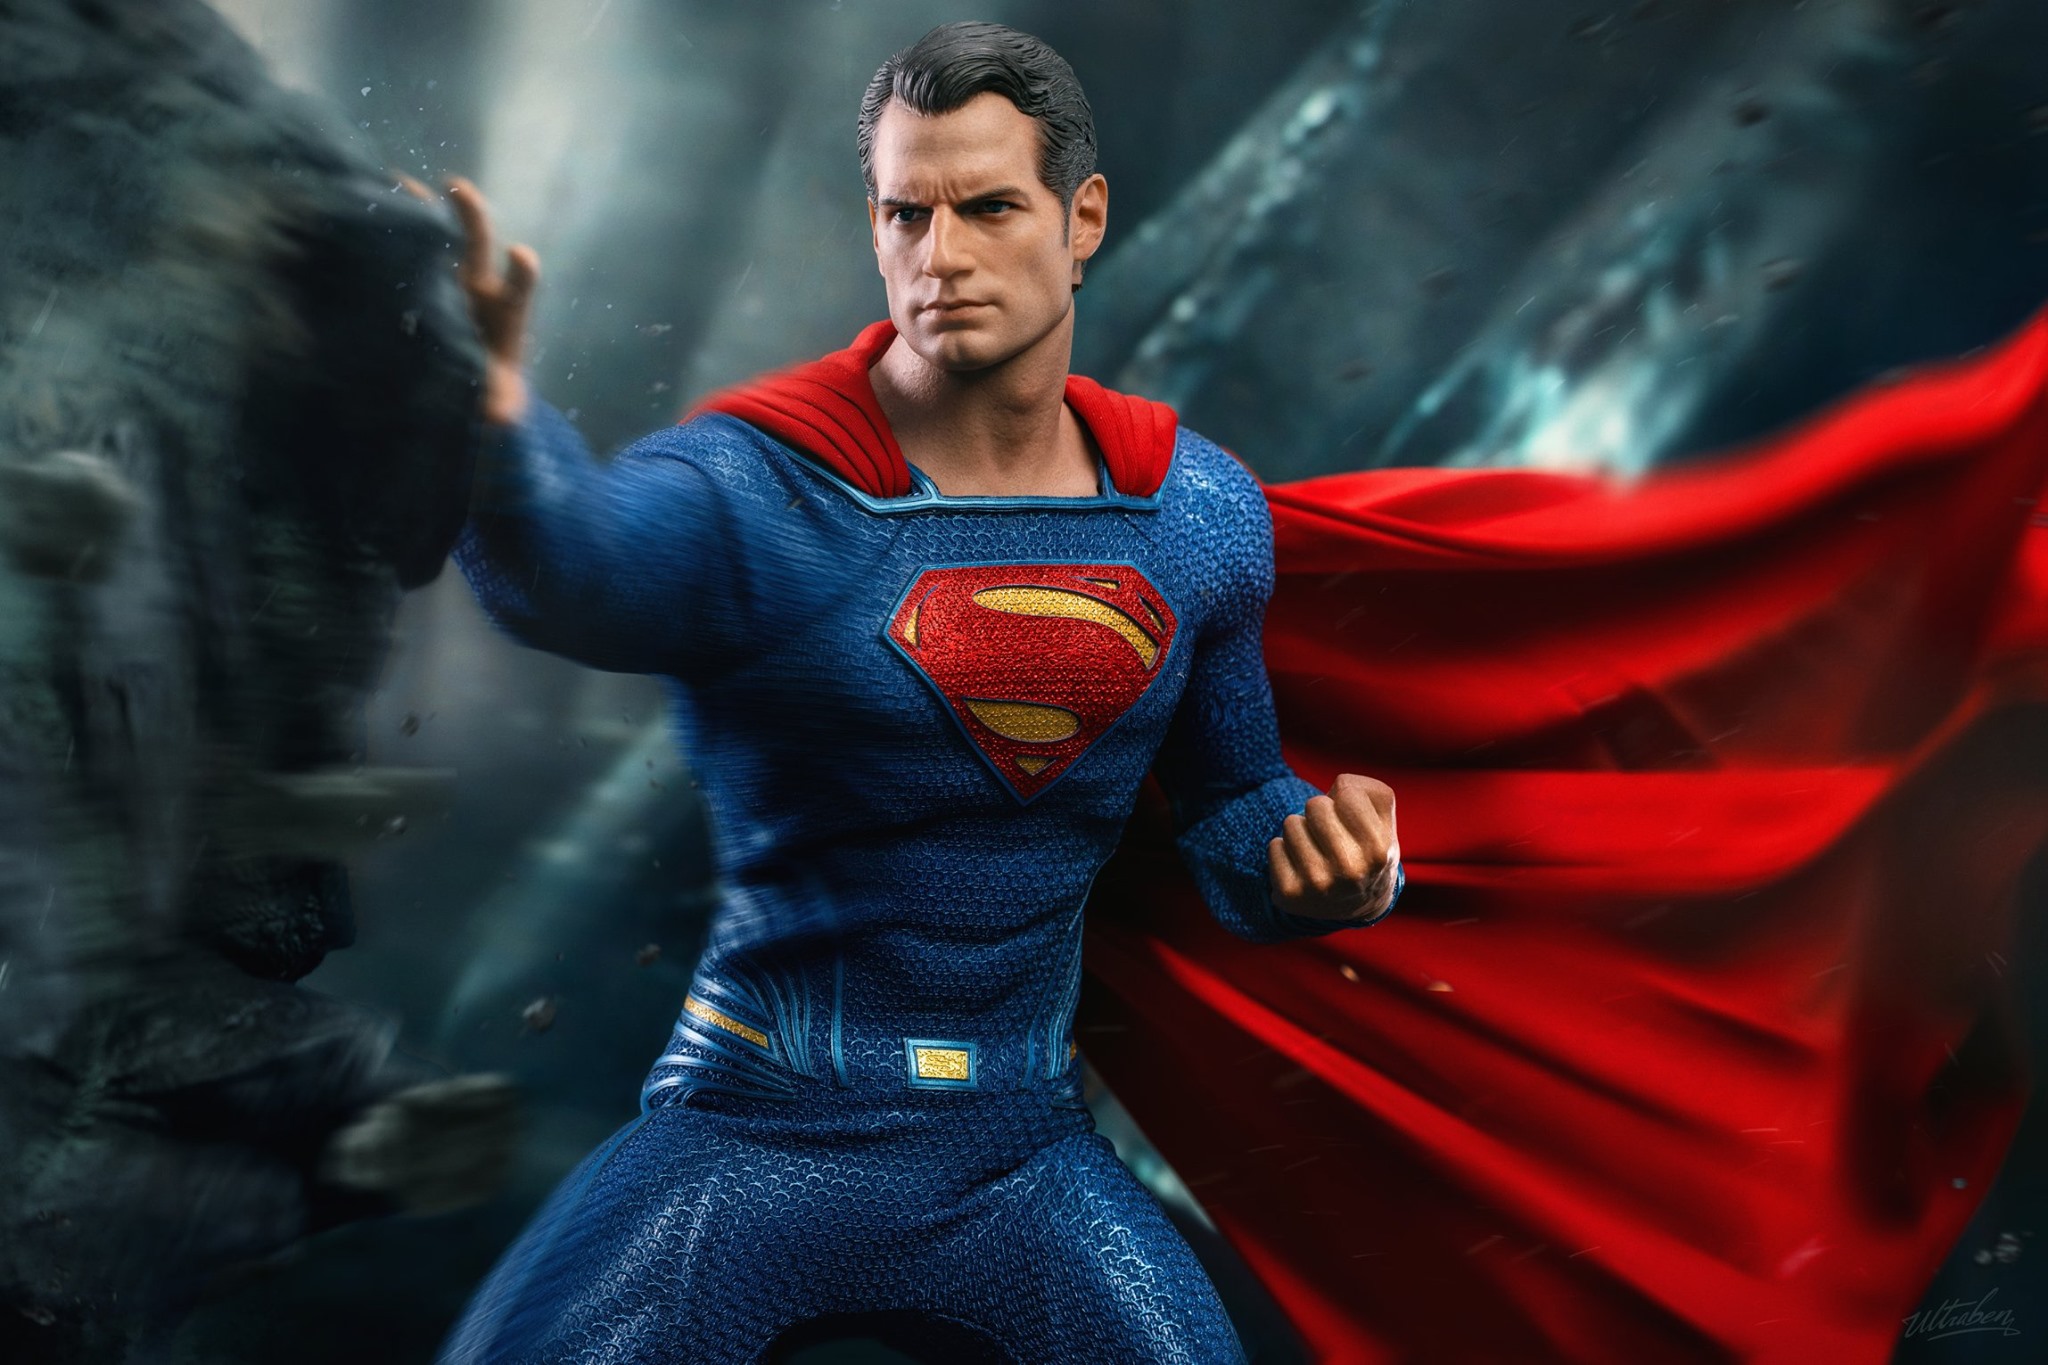 Hot Toys Justice League 1/6th Scale Superman Collectible Figure